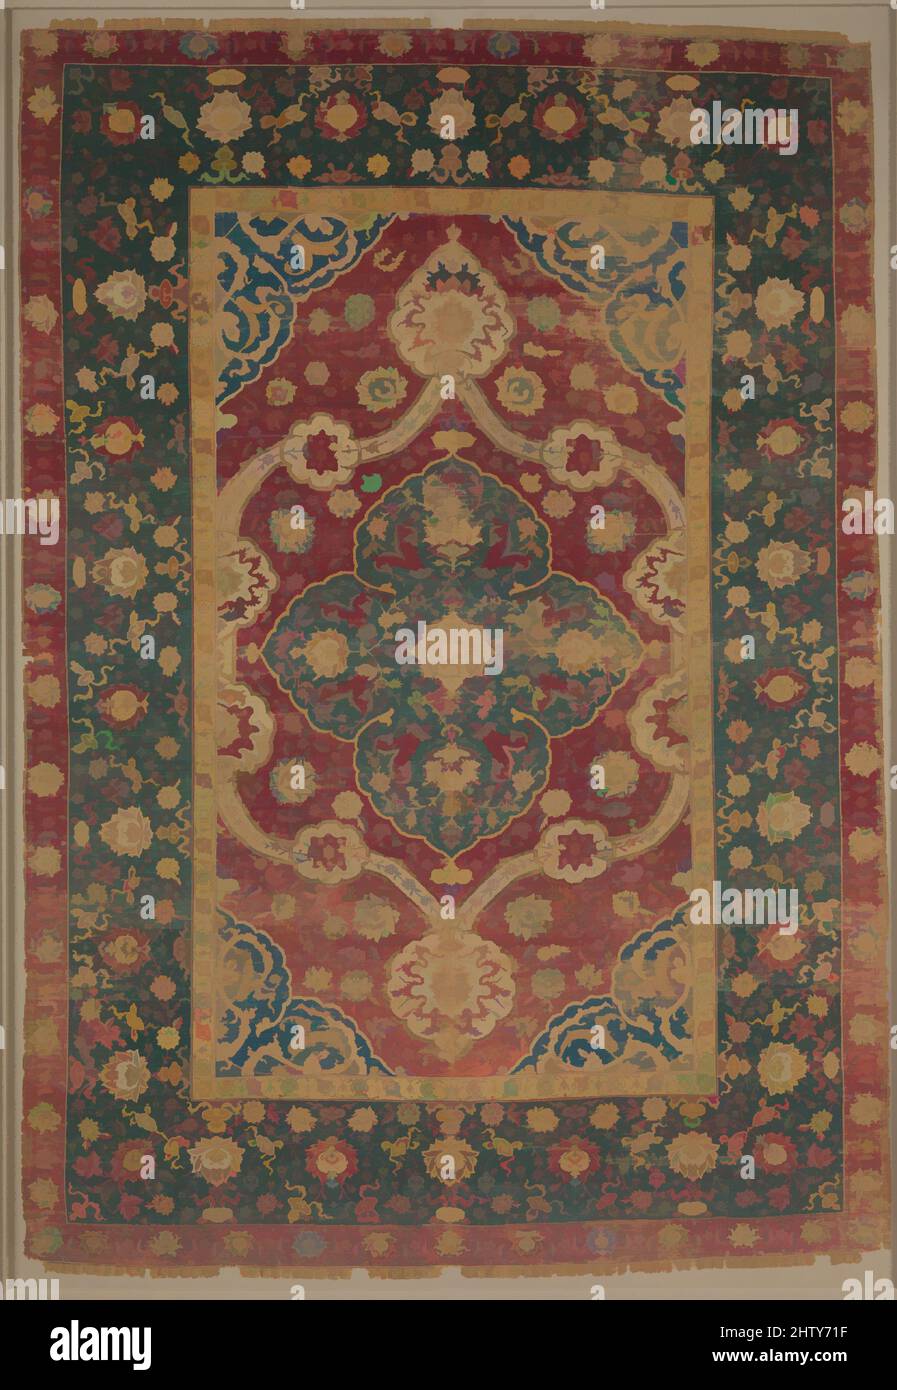 Art inspired by Silk Kashan Carpet, 16th century, Made in Iran, probably Kashan, Silk (warp, weft and pile); asymmetrically knotted pile, Rug: L. 96 in. (243.8 cm), Textiles-Rugs, This carpet was possibly woven in Kashan, an important center for silk trade and carpet manufacture during, Classic works modernized by Artotop with a splash of modernity. Shapes, color and value, eye-catching visual impact on art. Emotions through freedom of artworks in a contemporary way. A timeless message pursuing a wildly creative new direction. Artists turning to the digital medium and creating the Artotop NFT Stock Photo